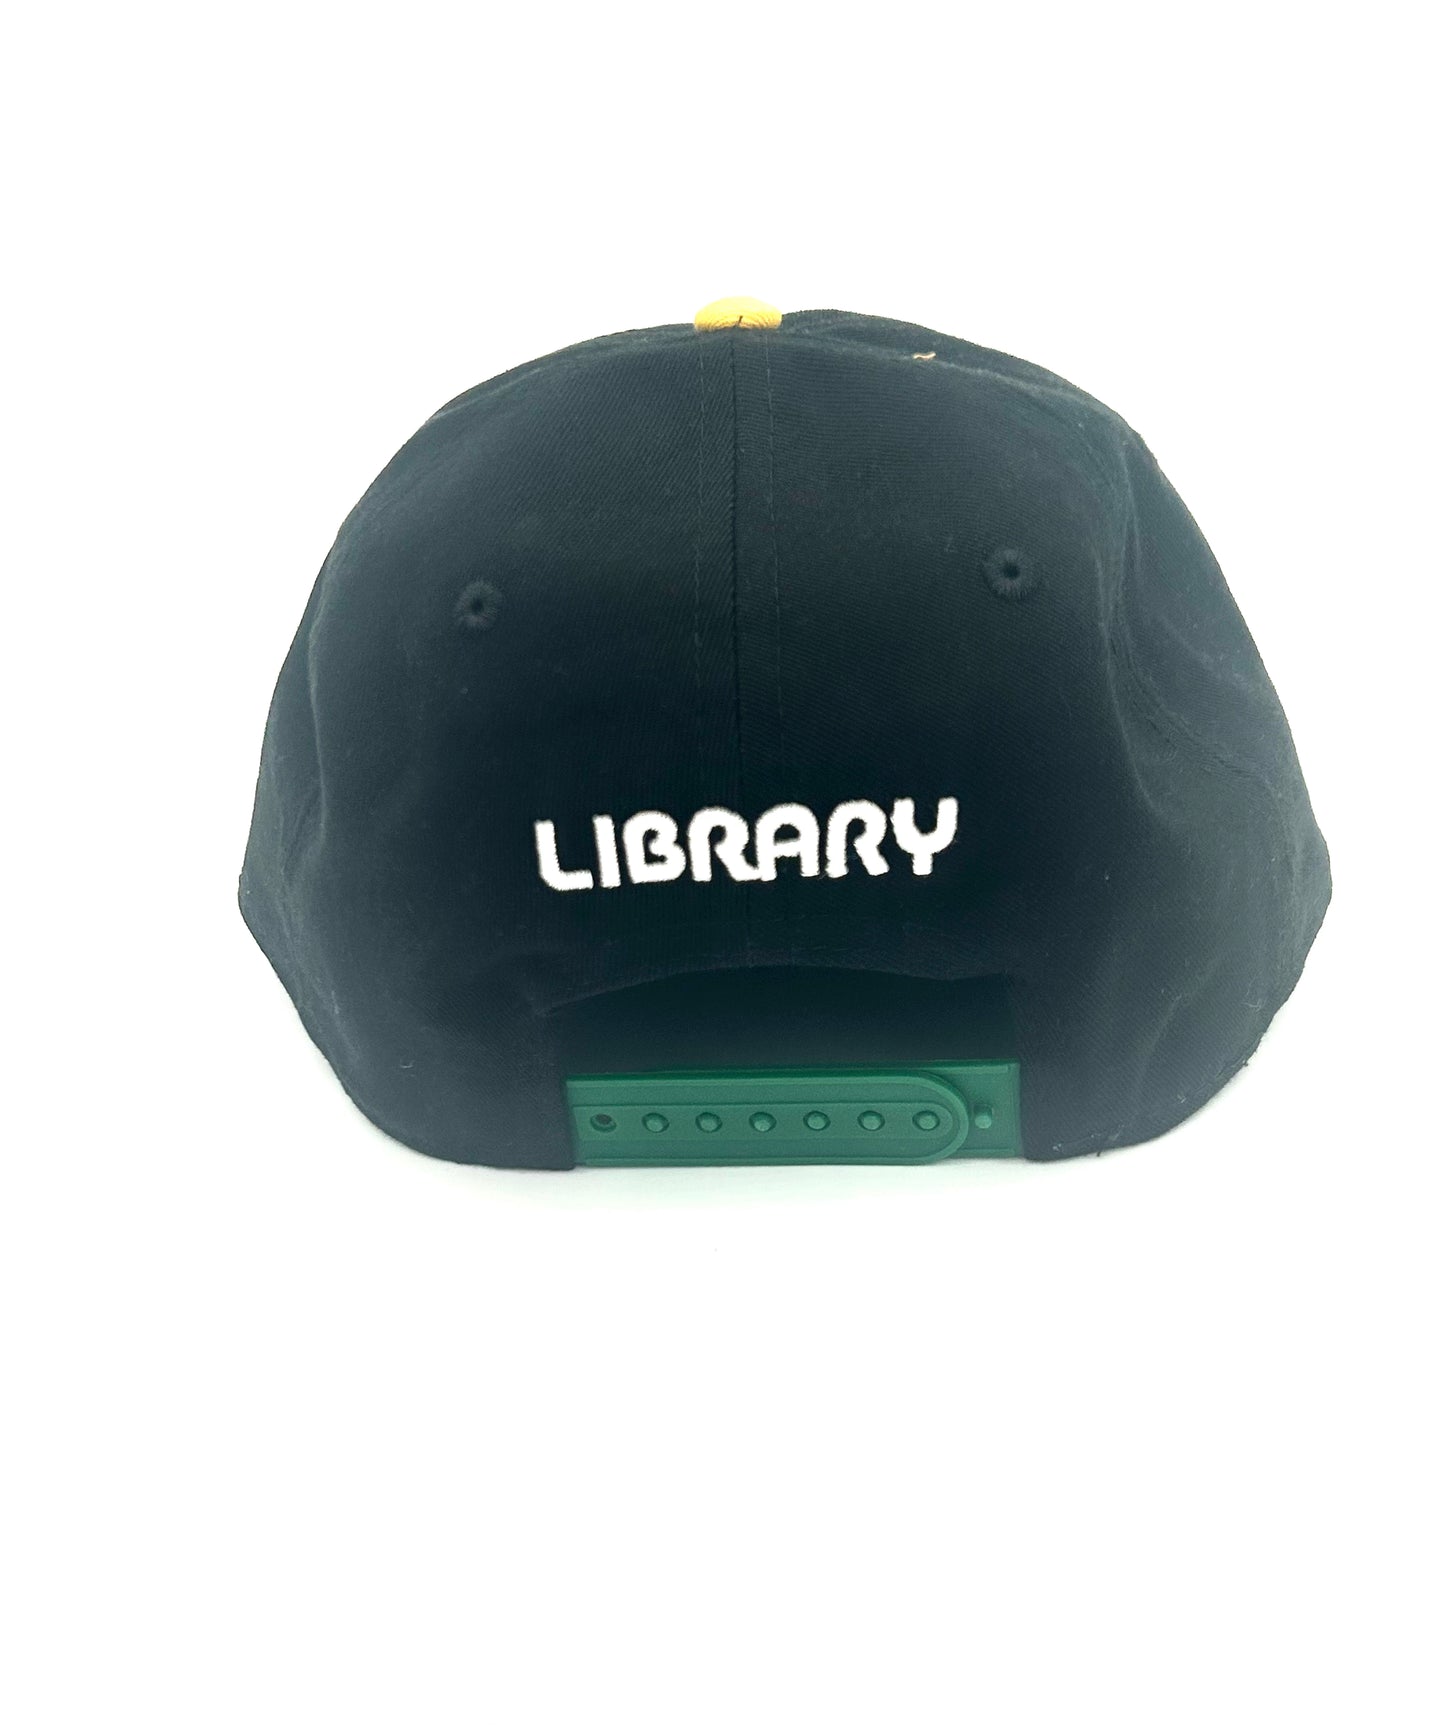 Library “Book Worm” Hat Black/Gold